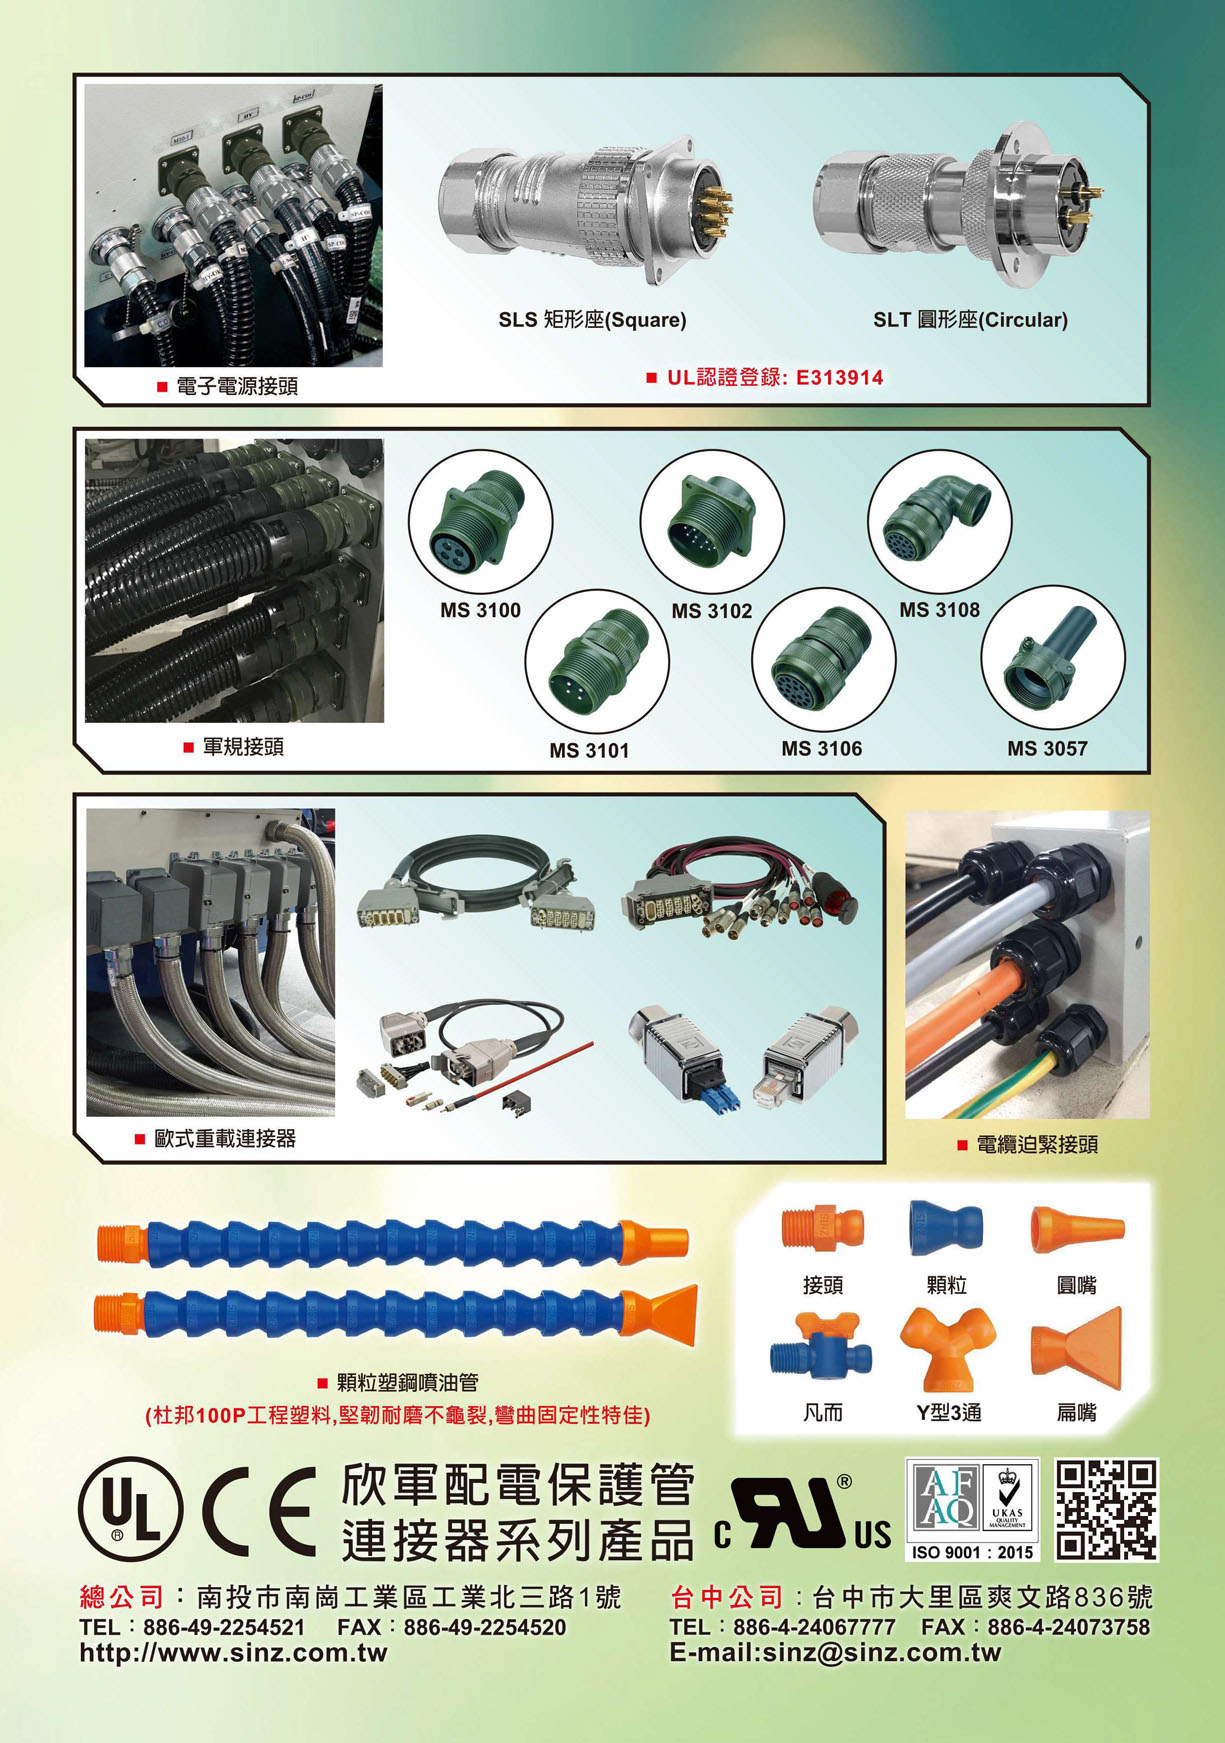 Who Makes Machinery in Taiwan (Chinese) SINZ ENTERPRISE CO., LTD.